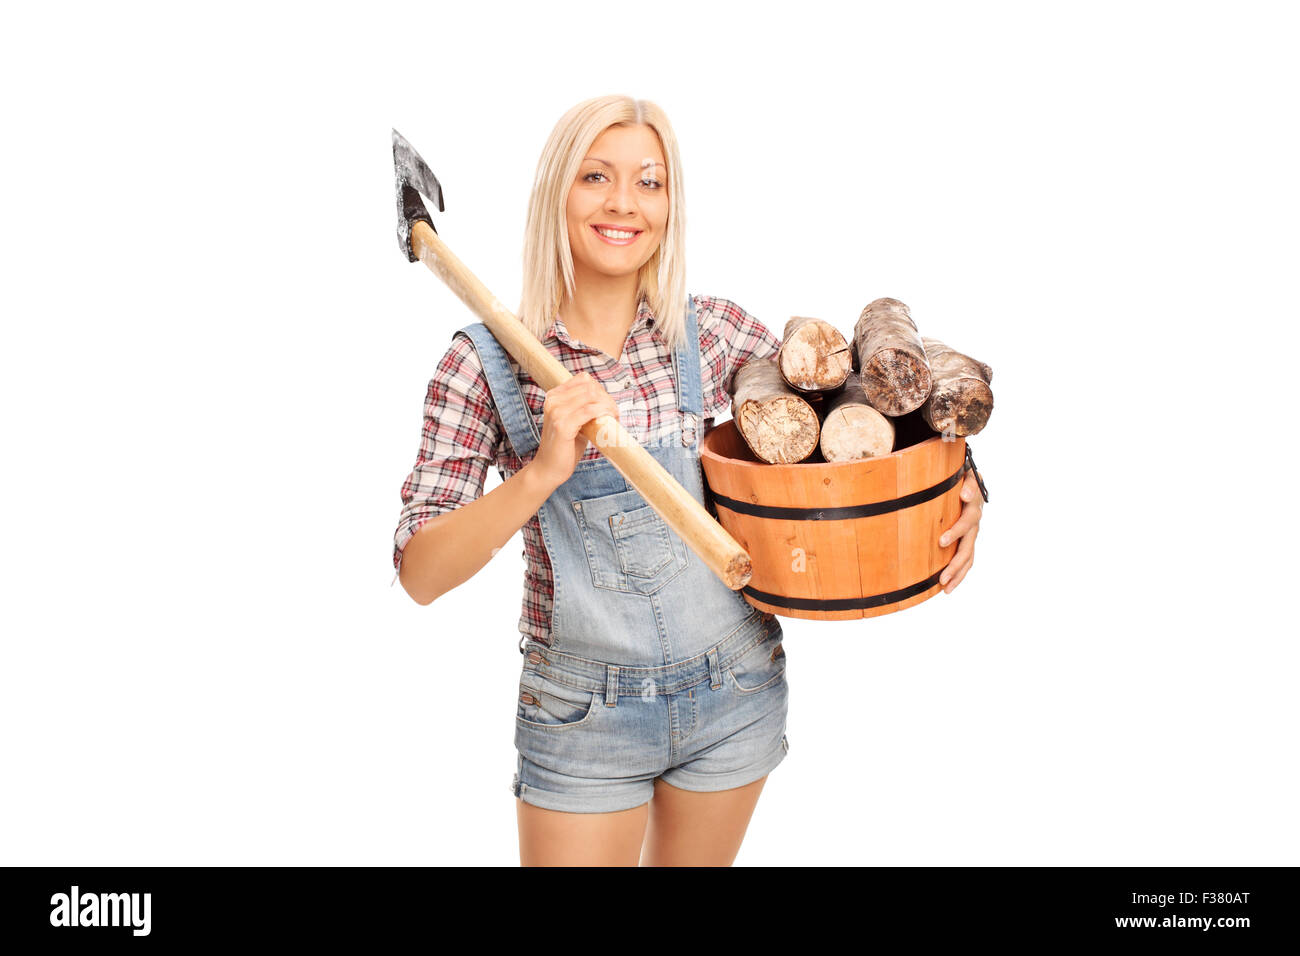 Young blond woman in checkered shirt holding a bucket full of logs and carrying an ax over her shoulder Stock Photo